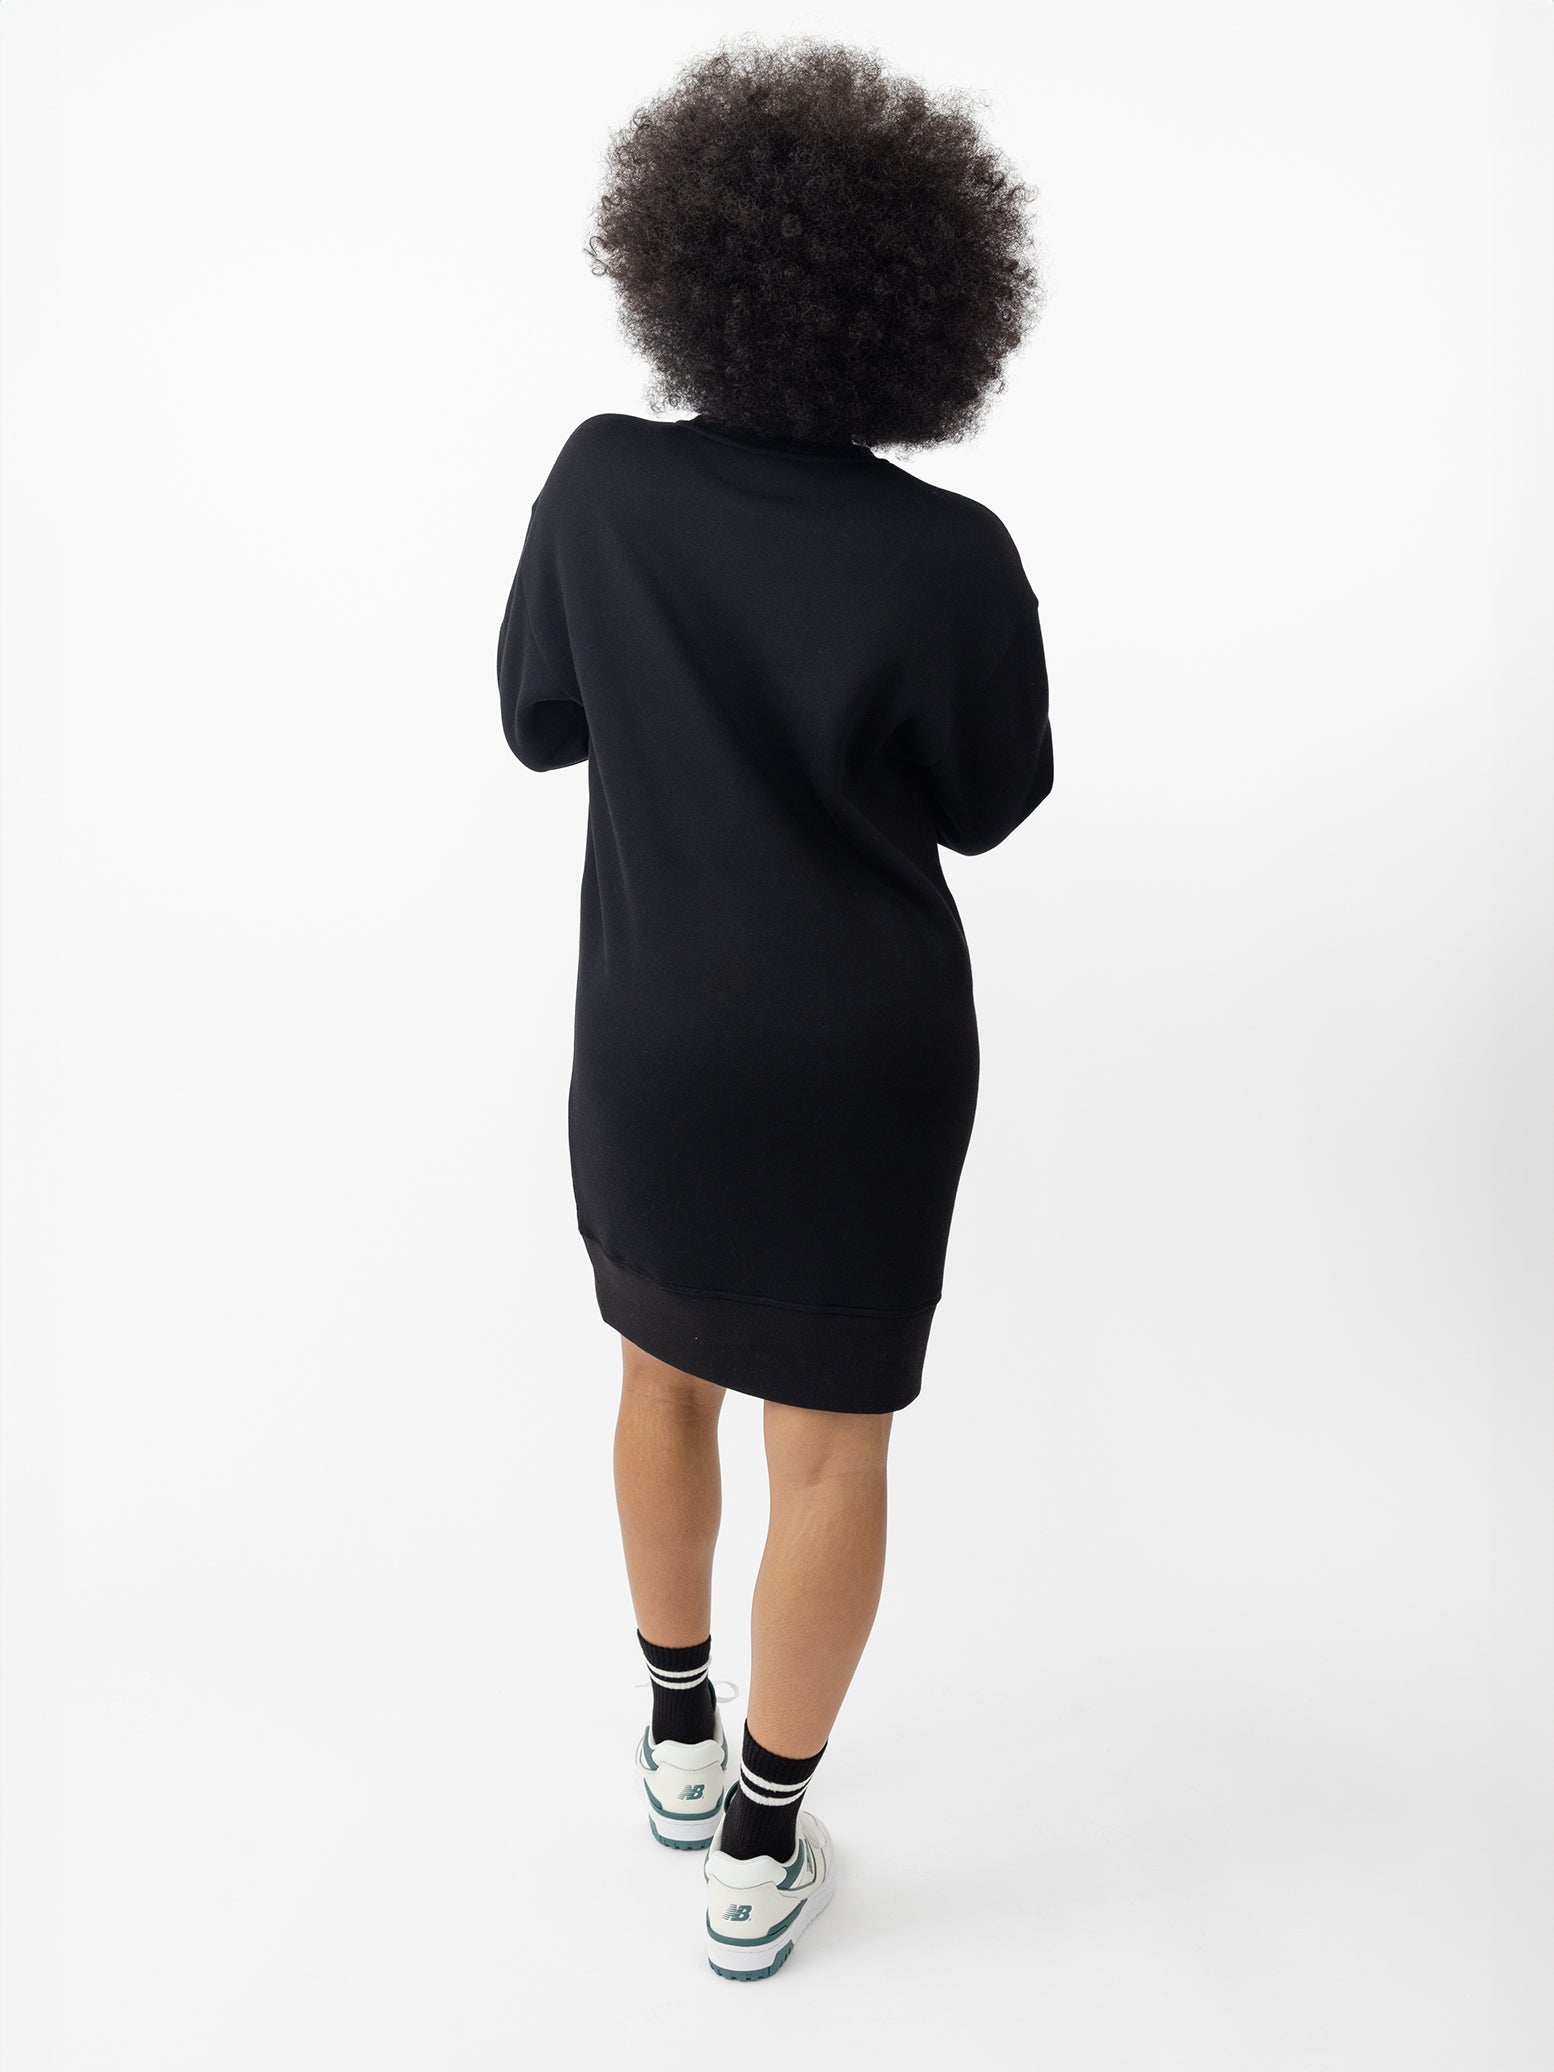 Woman wearing Black CityScape Crewneck Dress with white background 